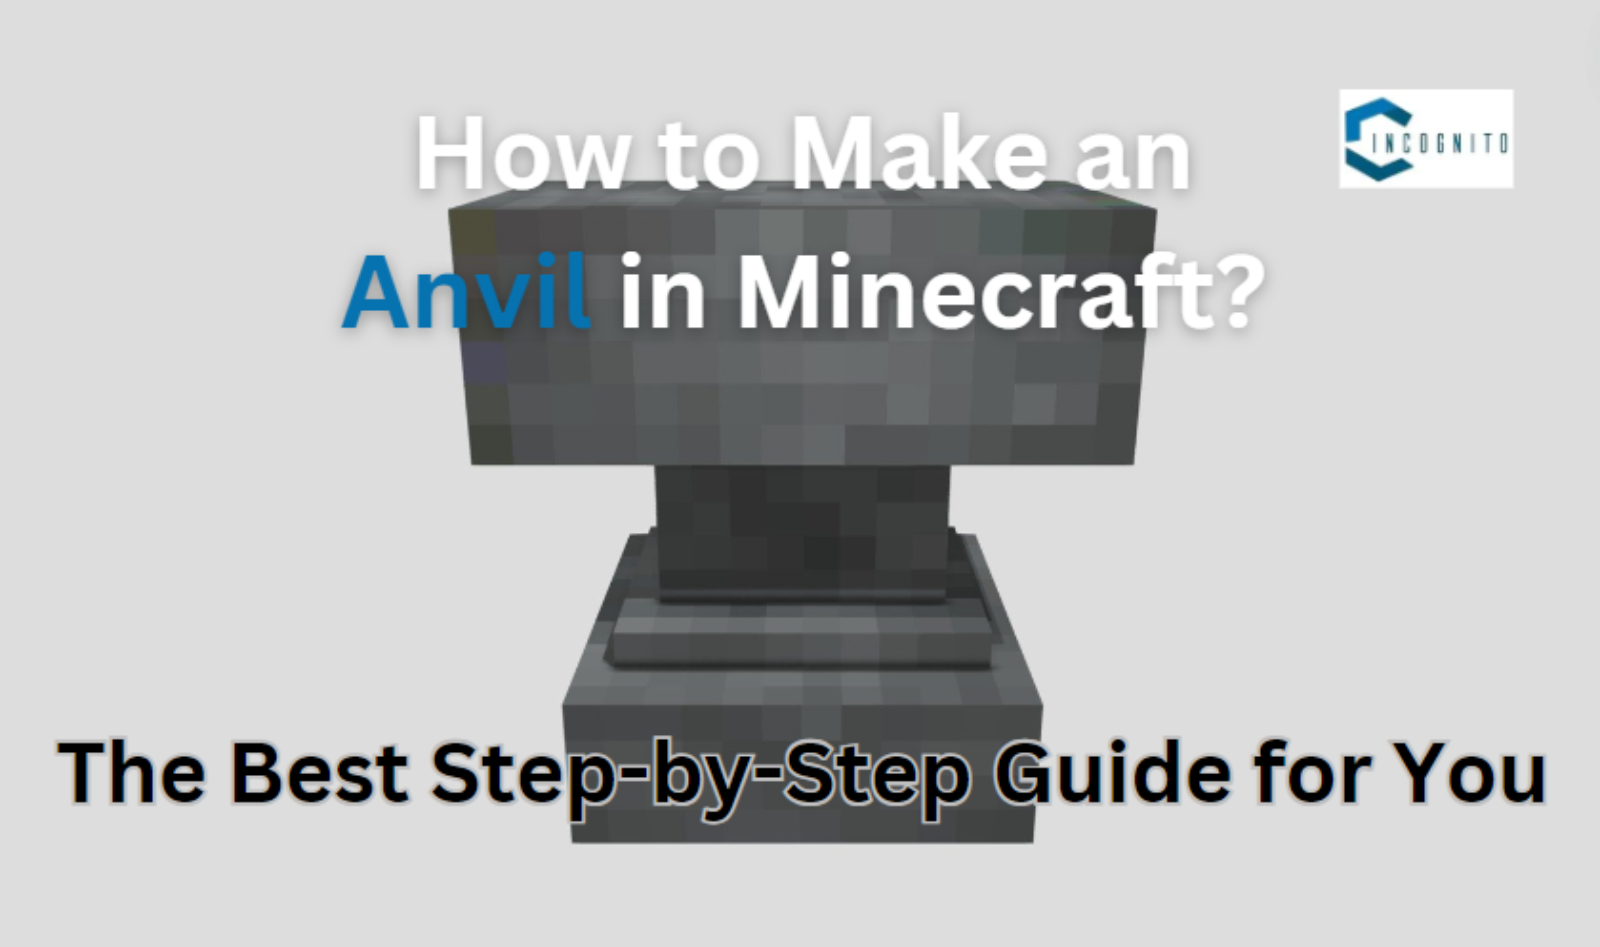 How to make an Anvil in Minecraft? The best step-by-step guide for you